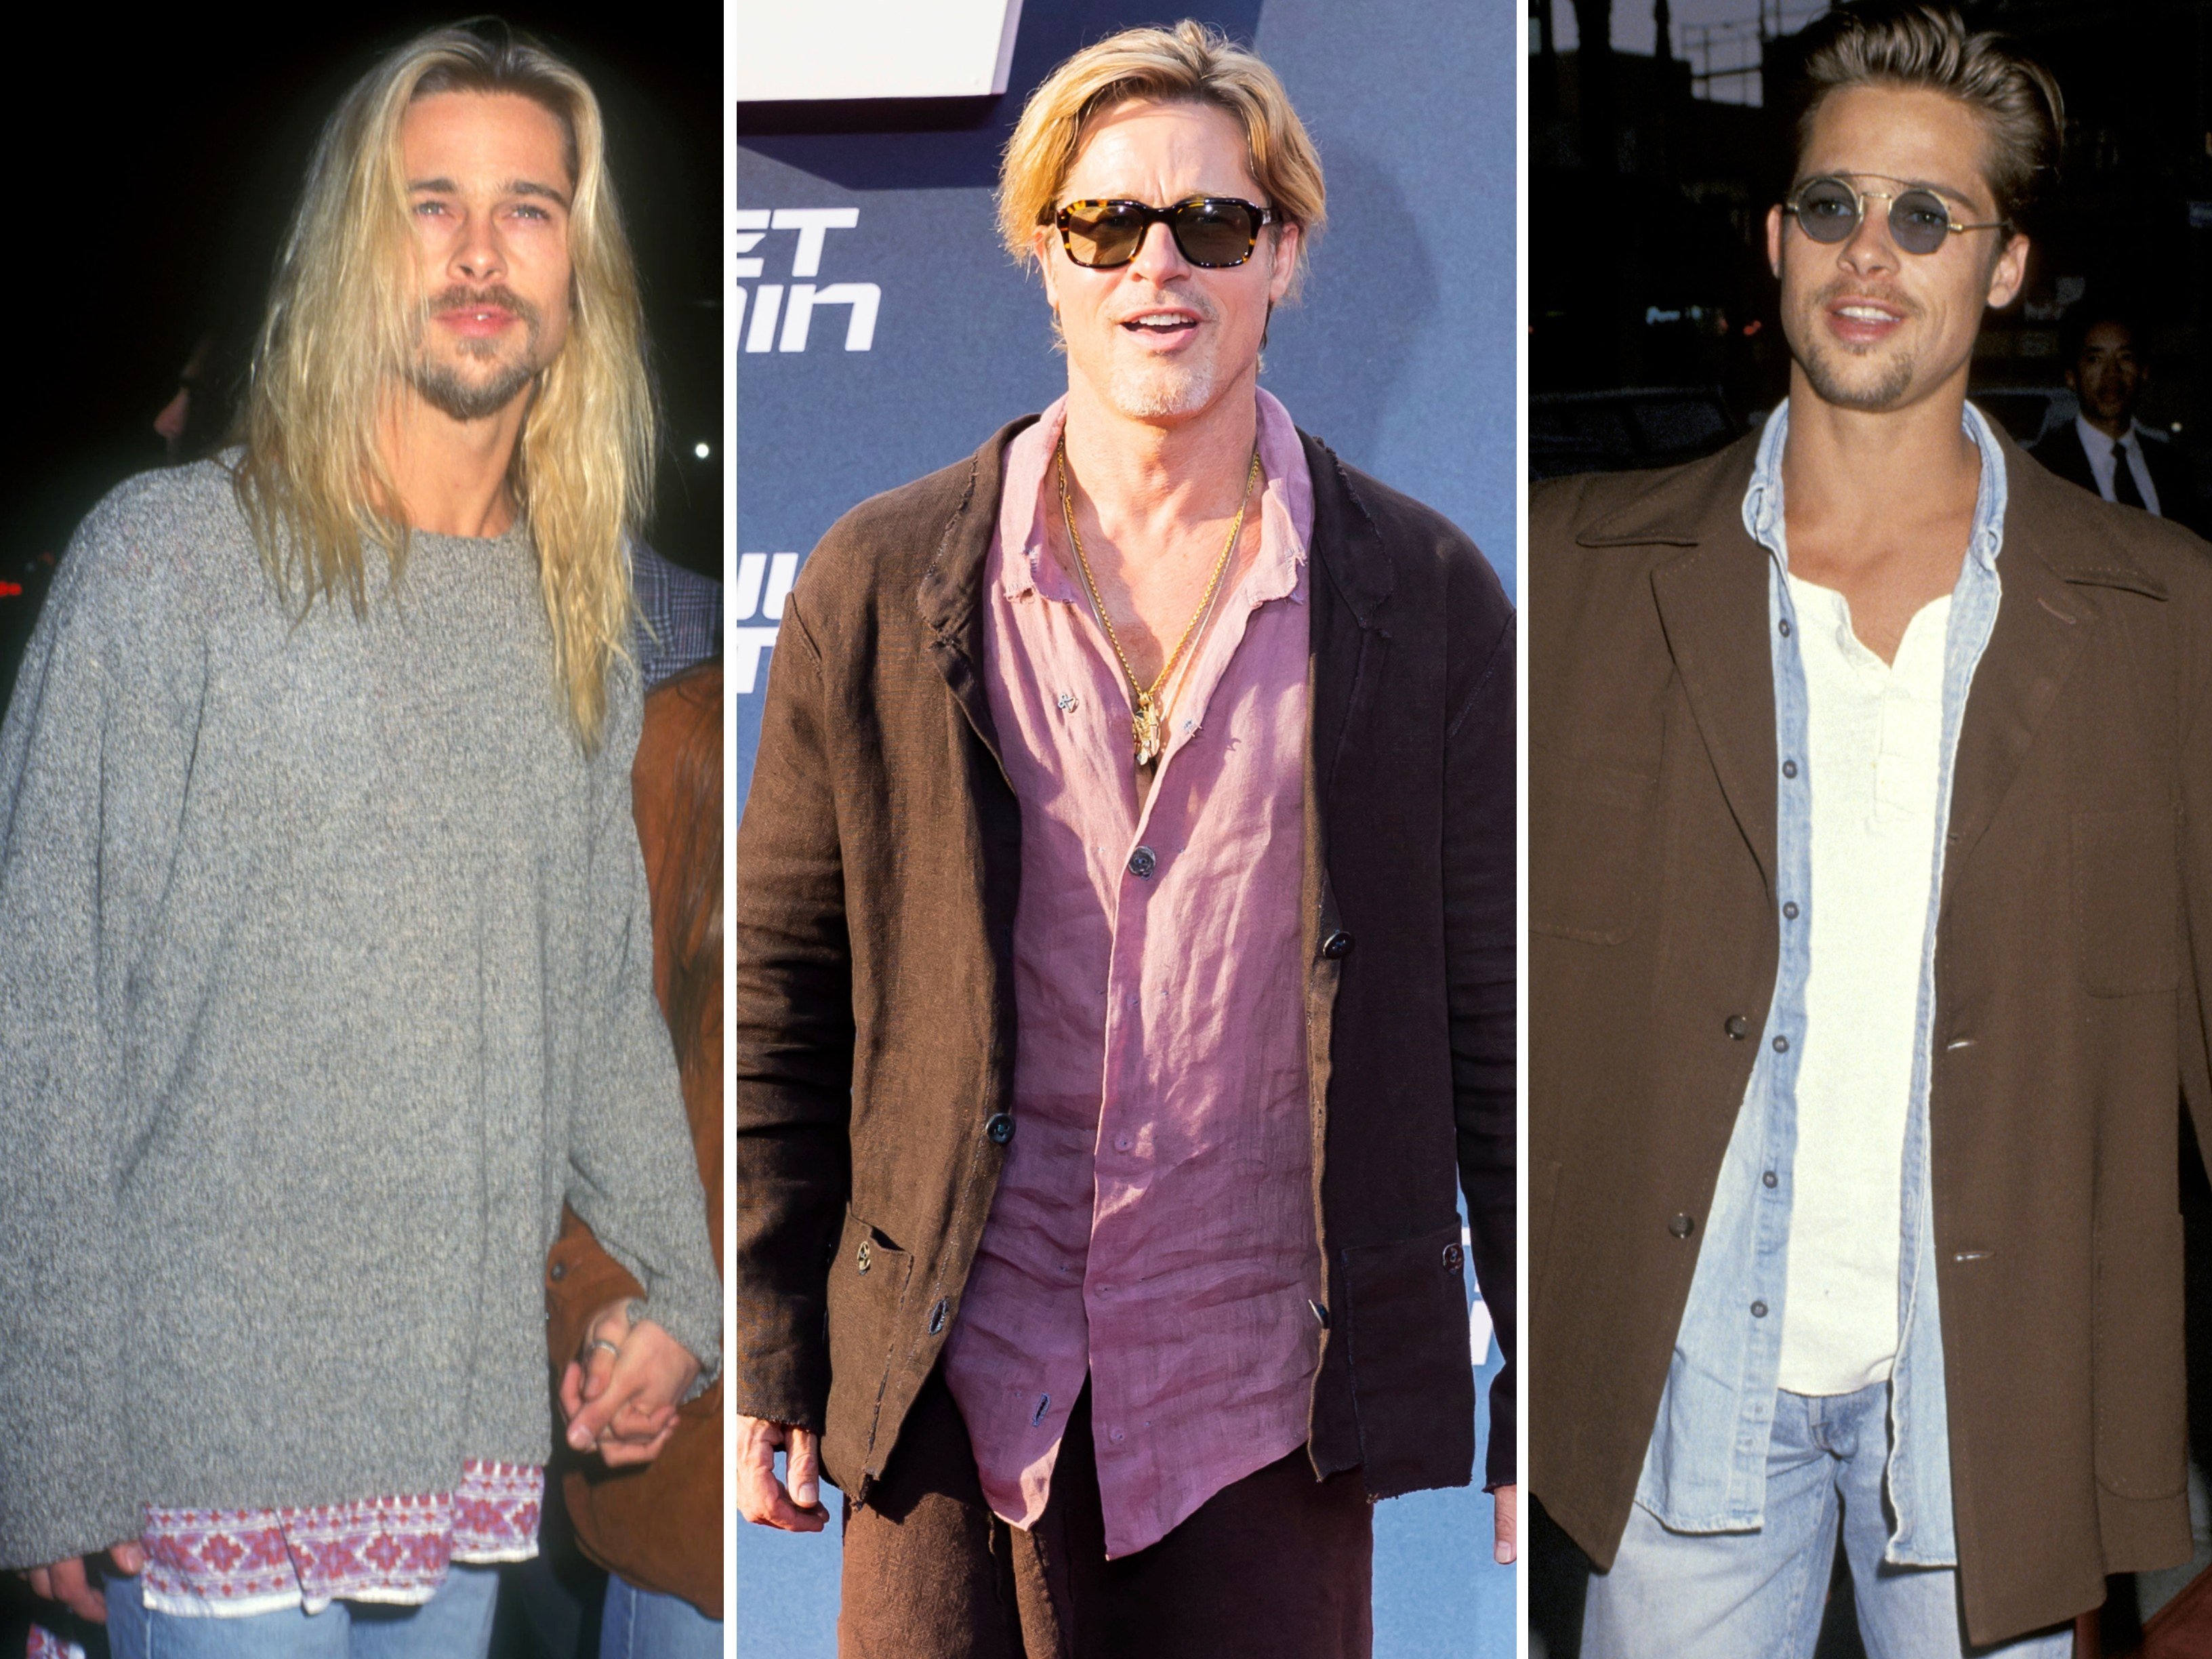 Brad Pitt's style evolution over the years, from casual to dapper: how he  went from jeans, tees and blond hair in the 90s, to suits on the red  carpet, to breaking the